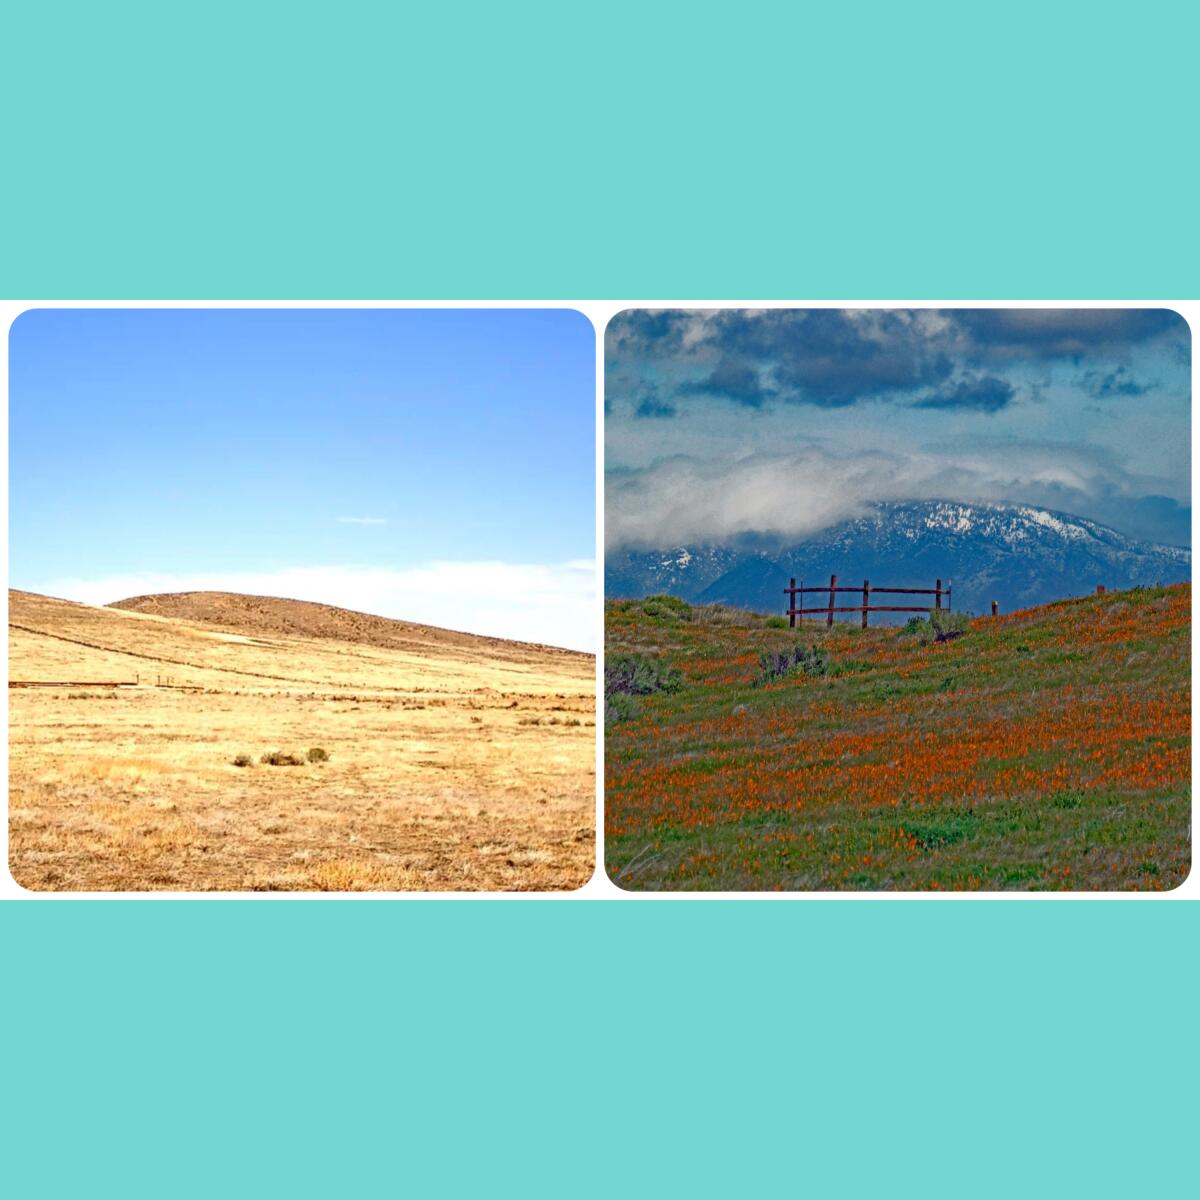 Before and after photos of The Antelope Valley Poppy Reserve